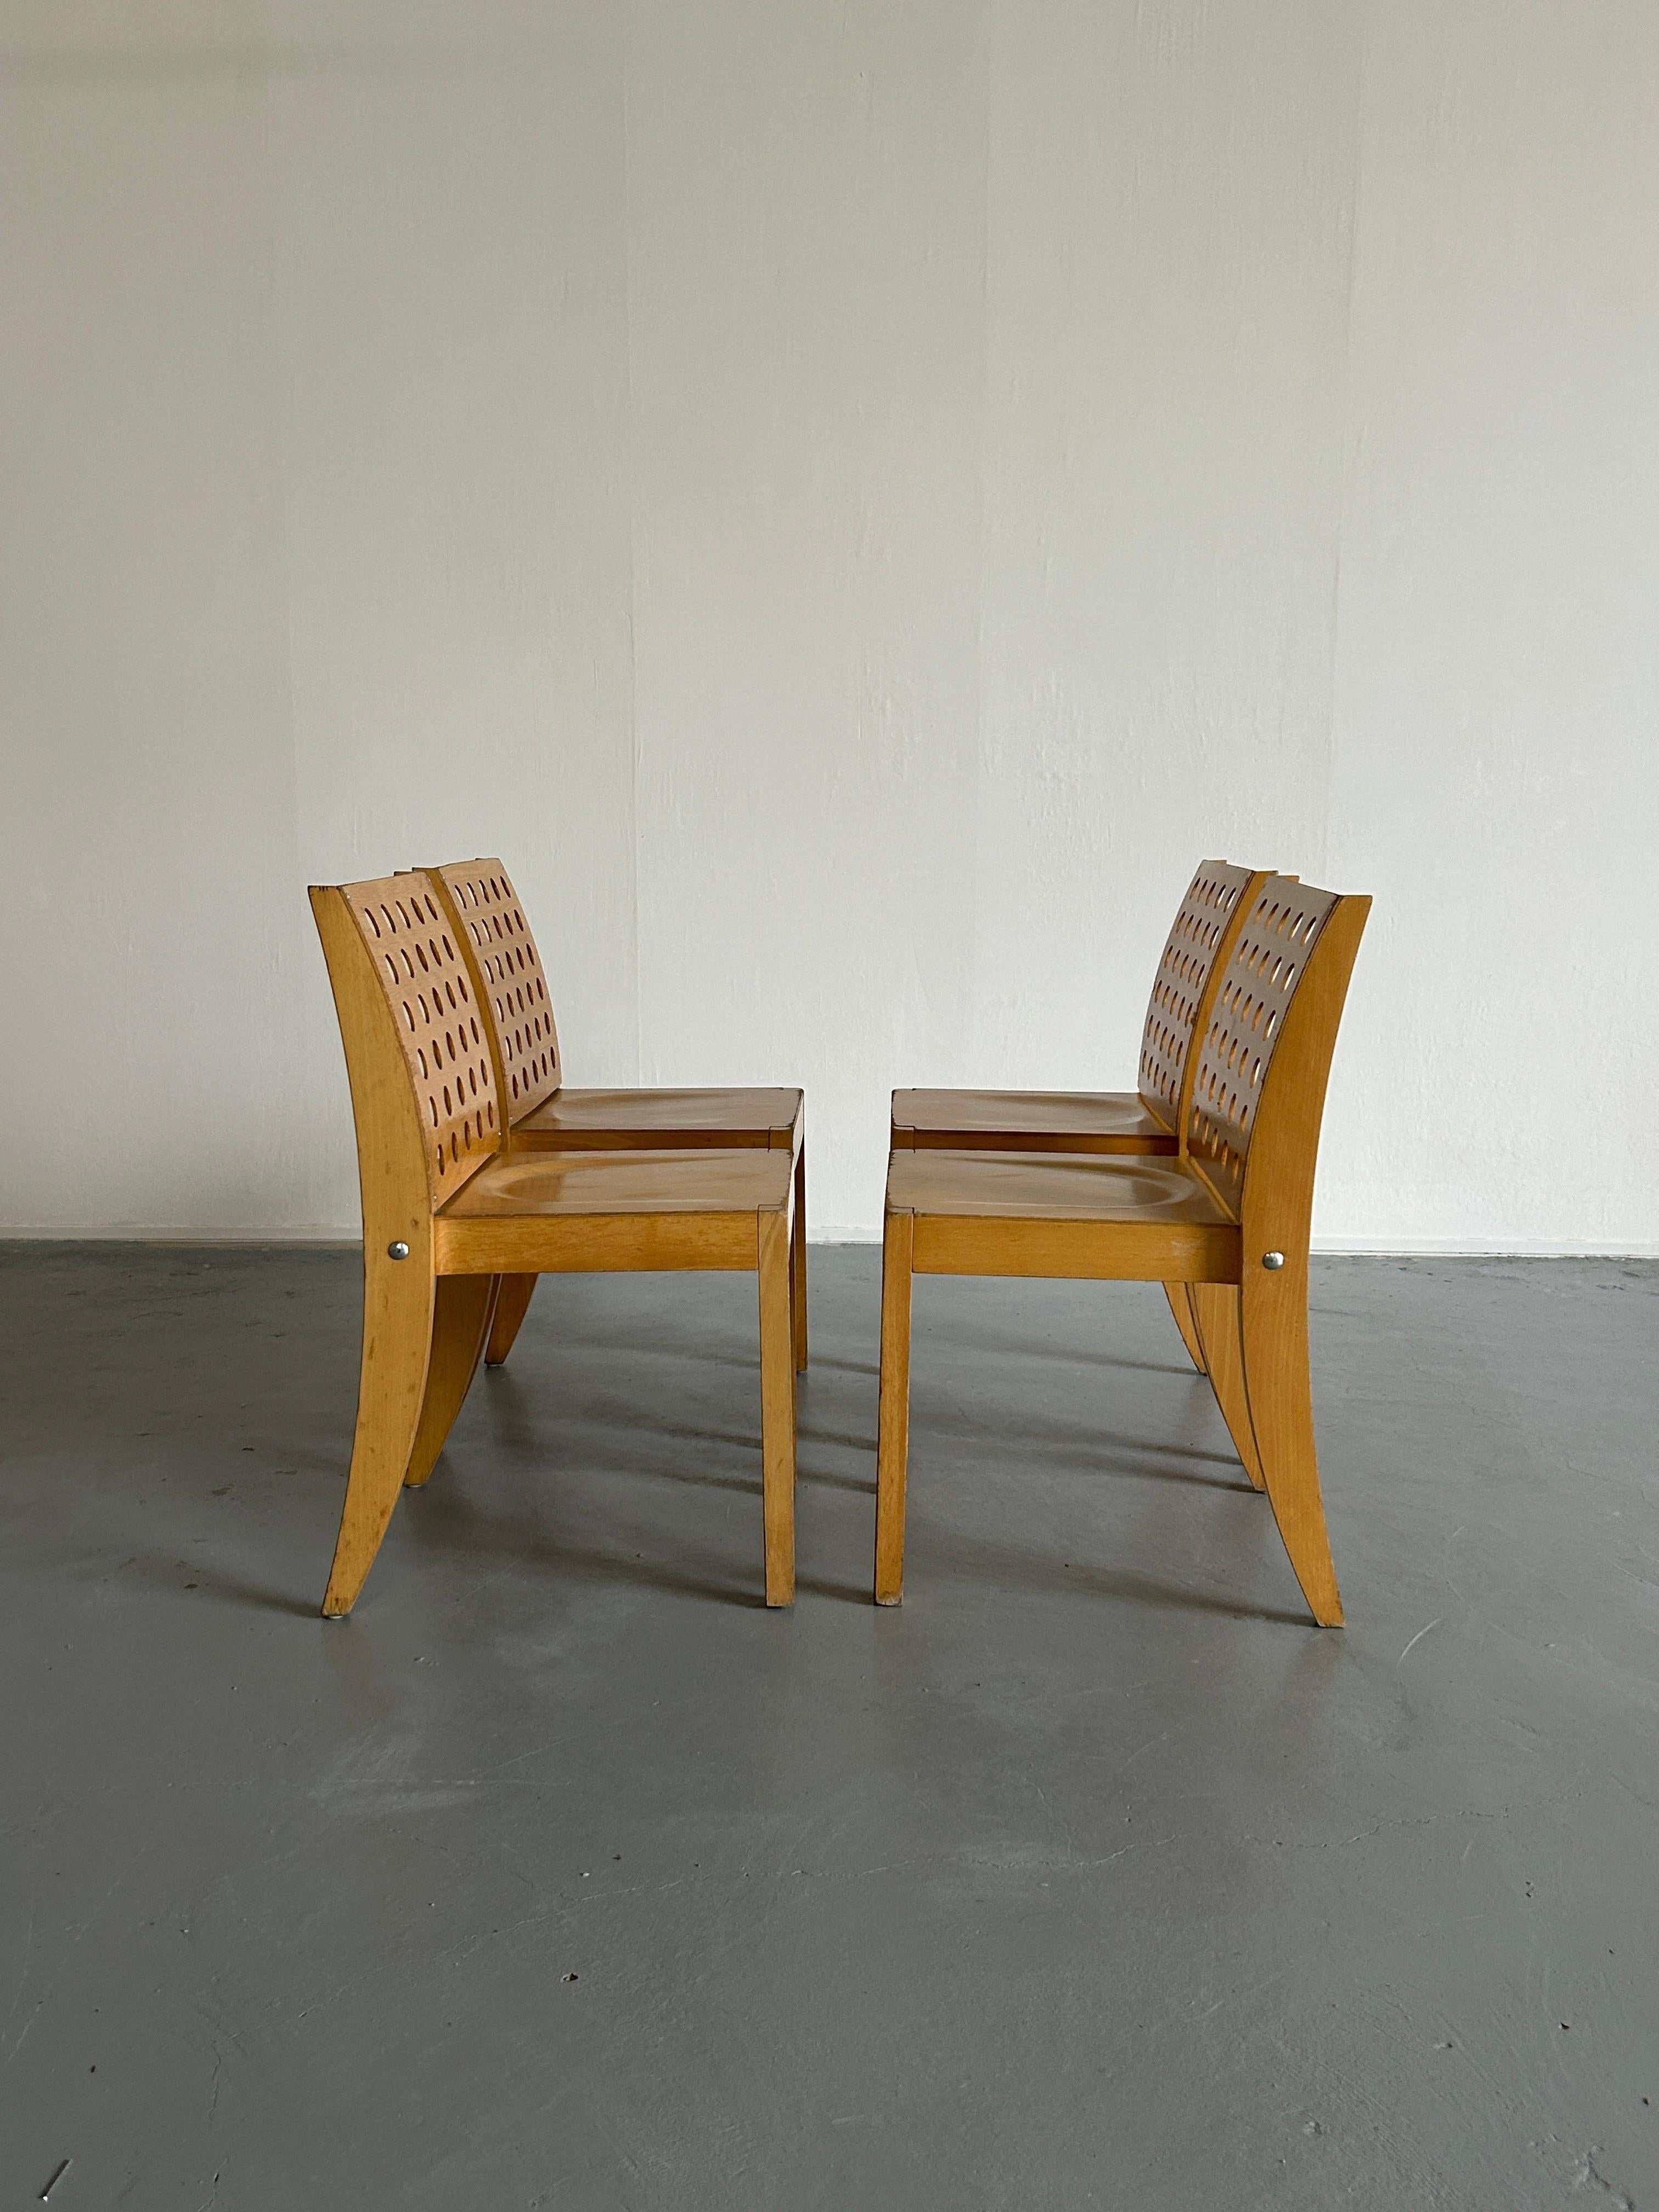 German Set of 4 Vintage Thonet S471 Mid-Century-Modern Chairs by Christoph Zschocke